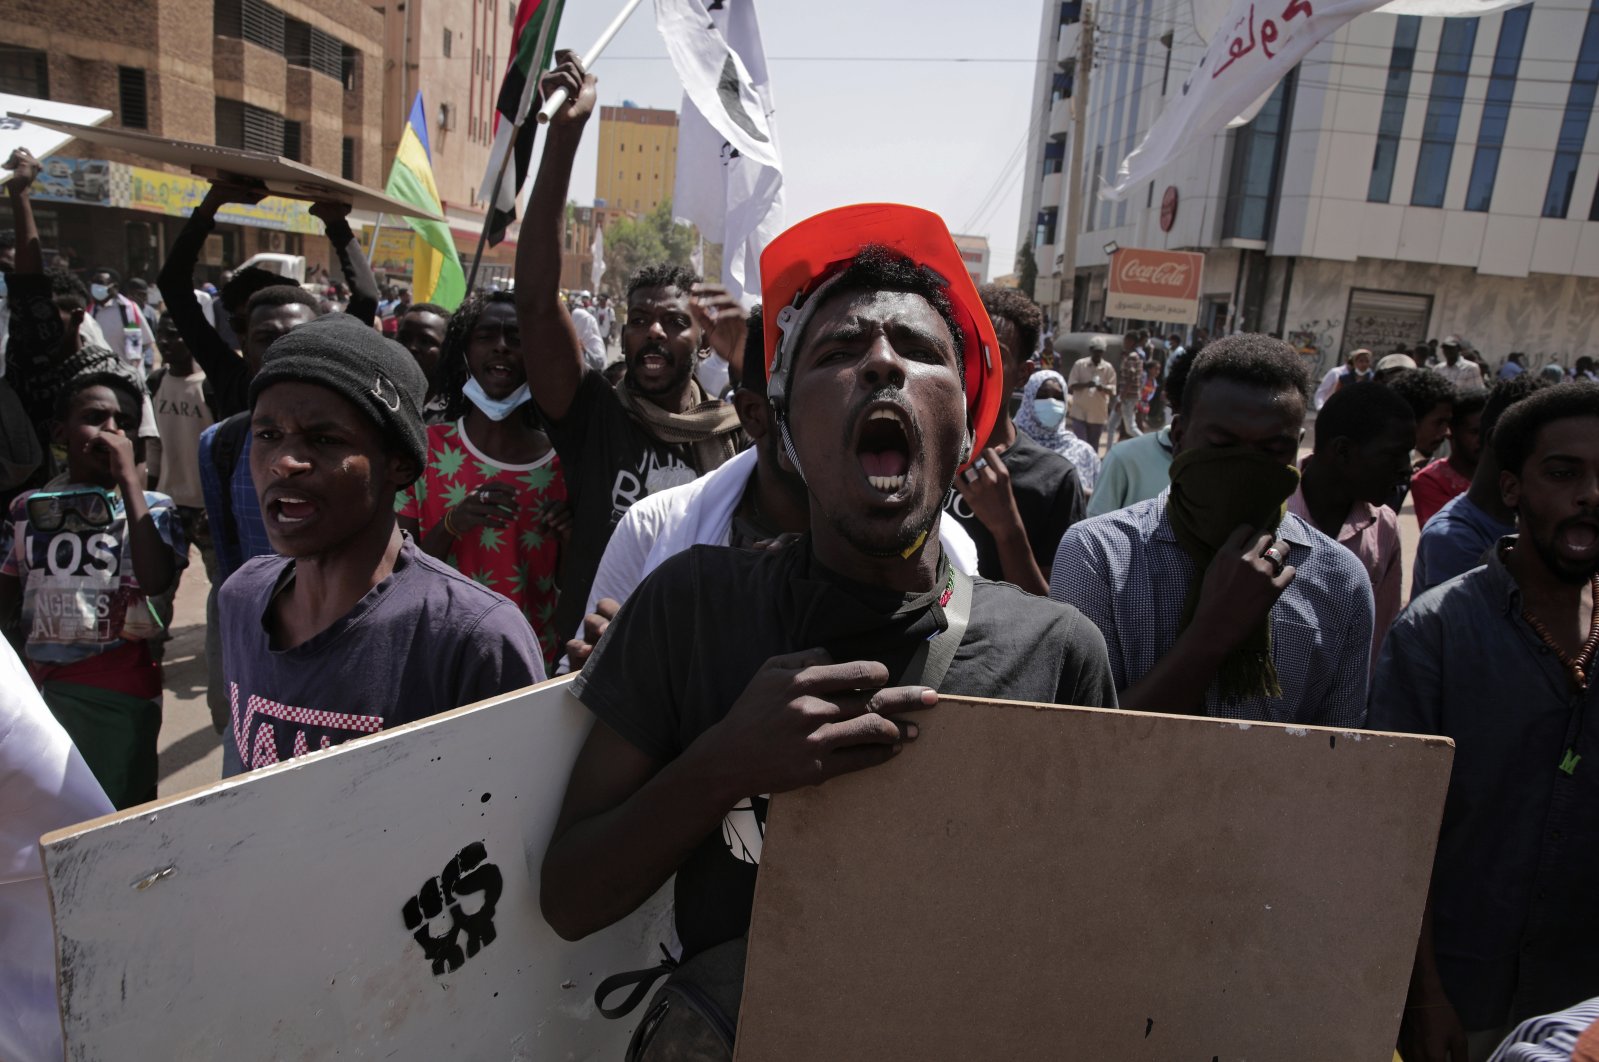 Sudanese protesters rally against the October 2021 military coup, which led to deaths and scores of arrests of demonstrators, in Khartoum, Sudan, Feb. 28, 2022. (AP Photo)